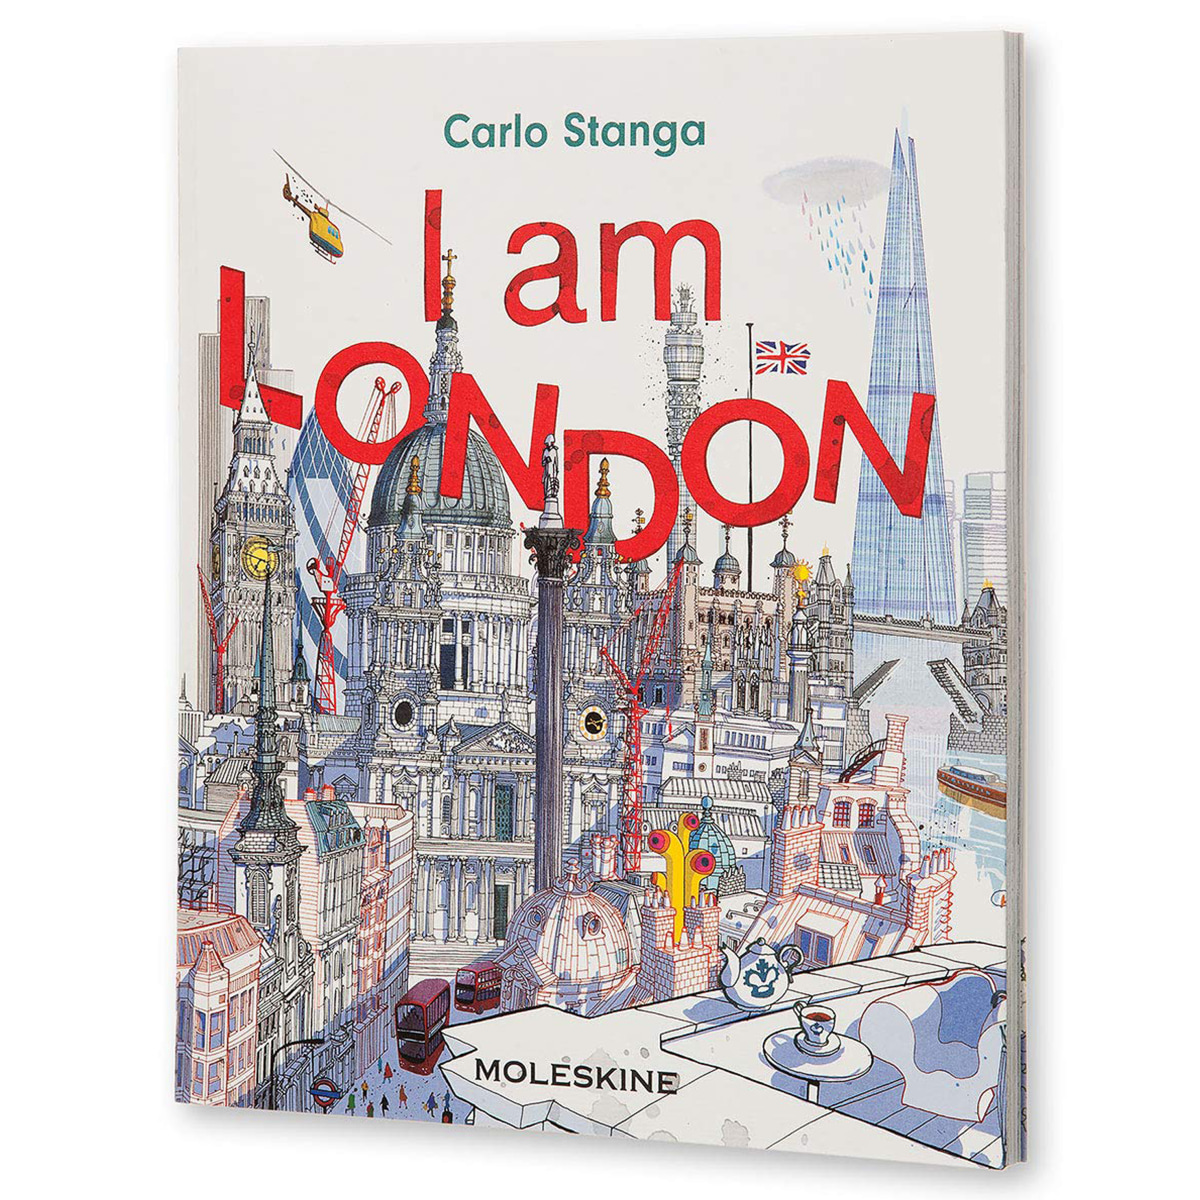 I am in london now. Copybook London. Notebook in London. Stanga.